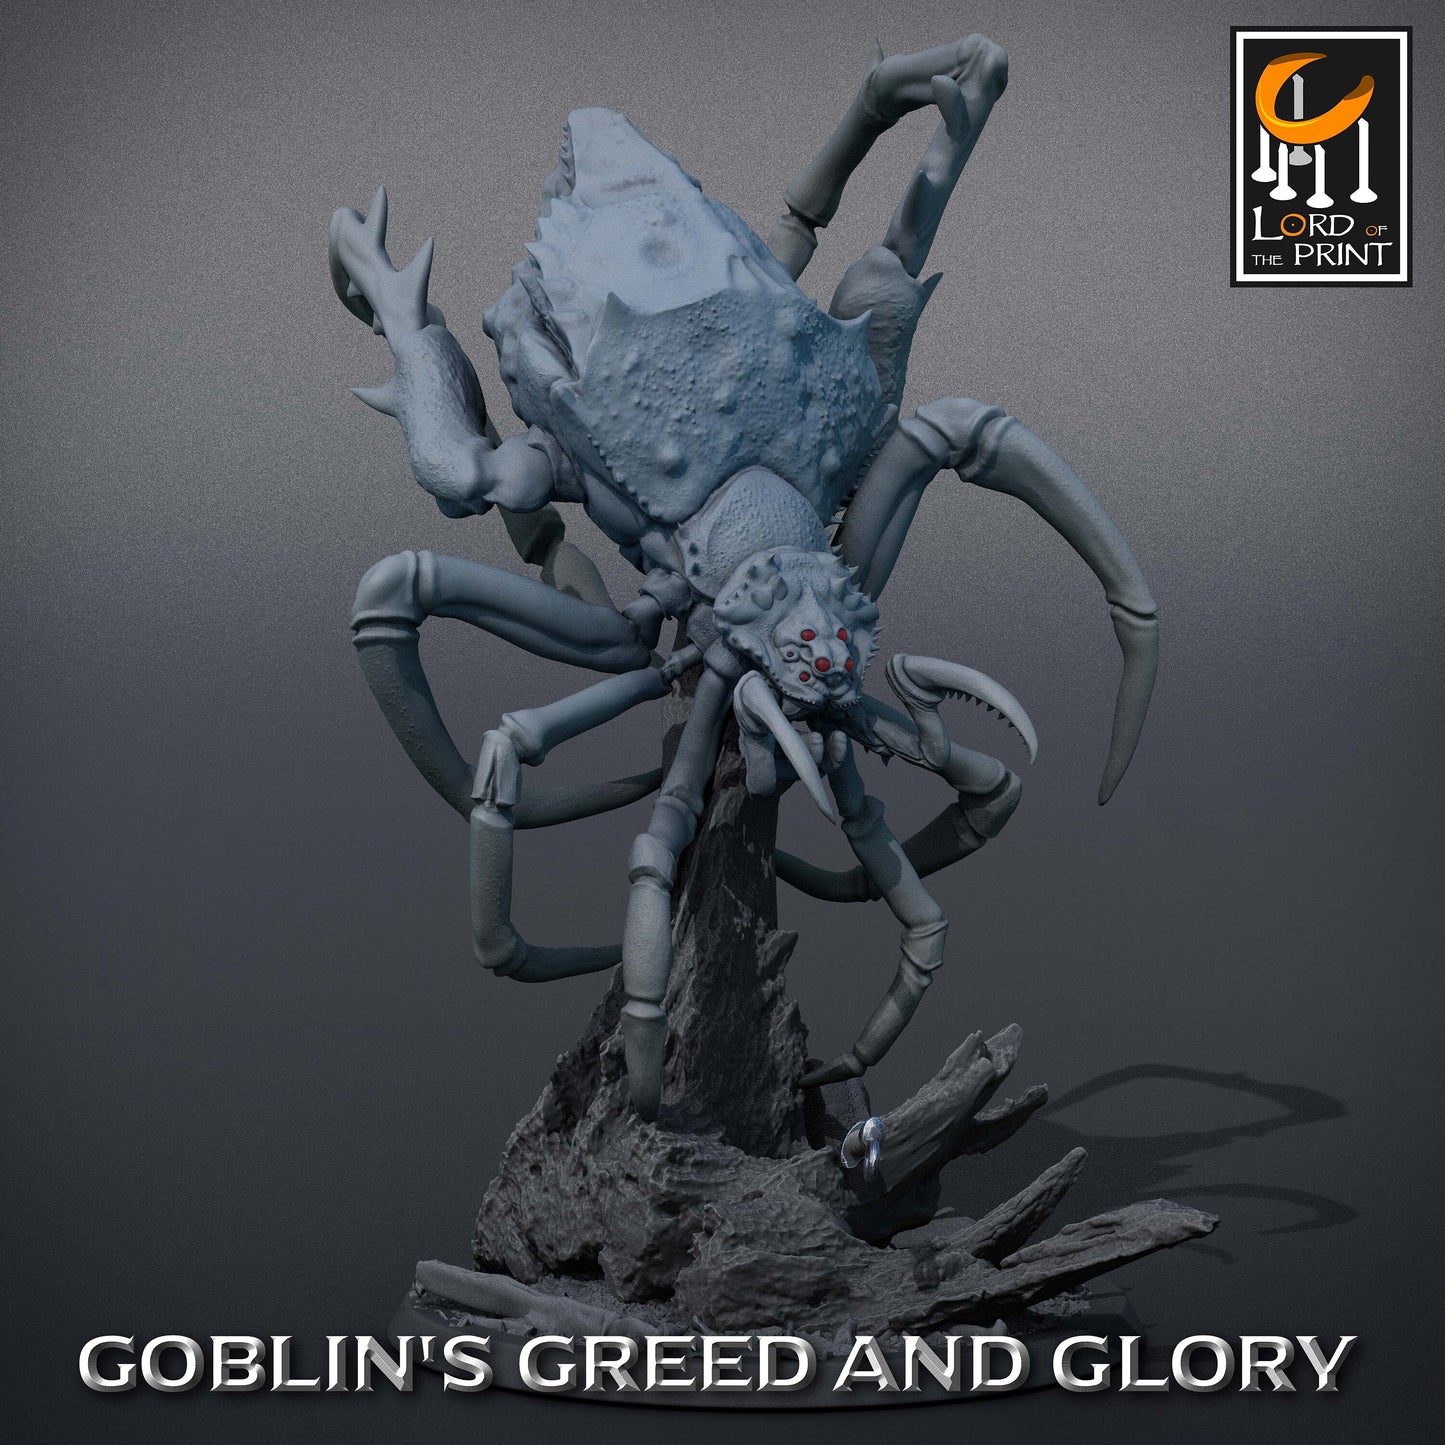 Goblin Spiders Wild (Set 2) by Lord of the Print | Please Read Description